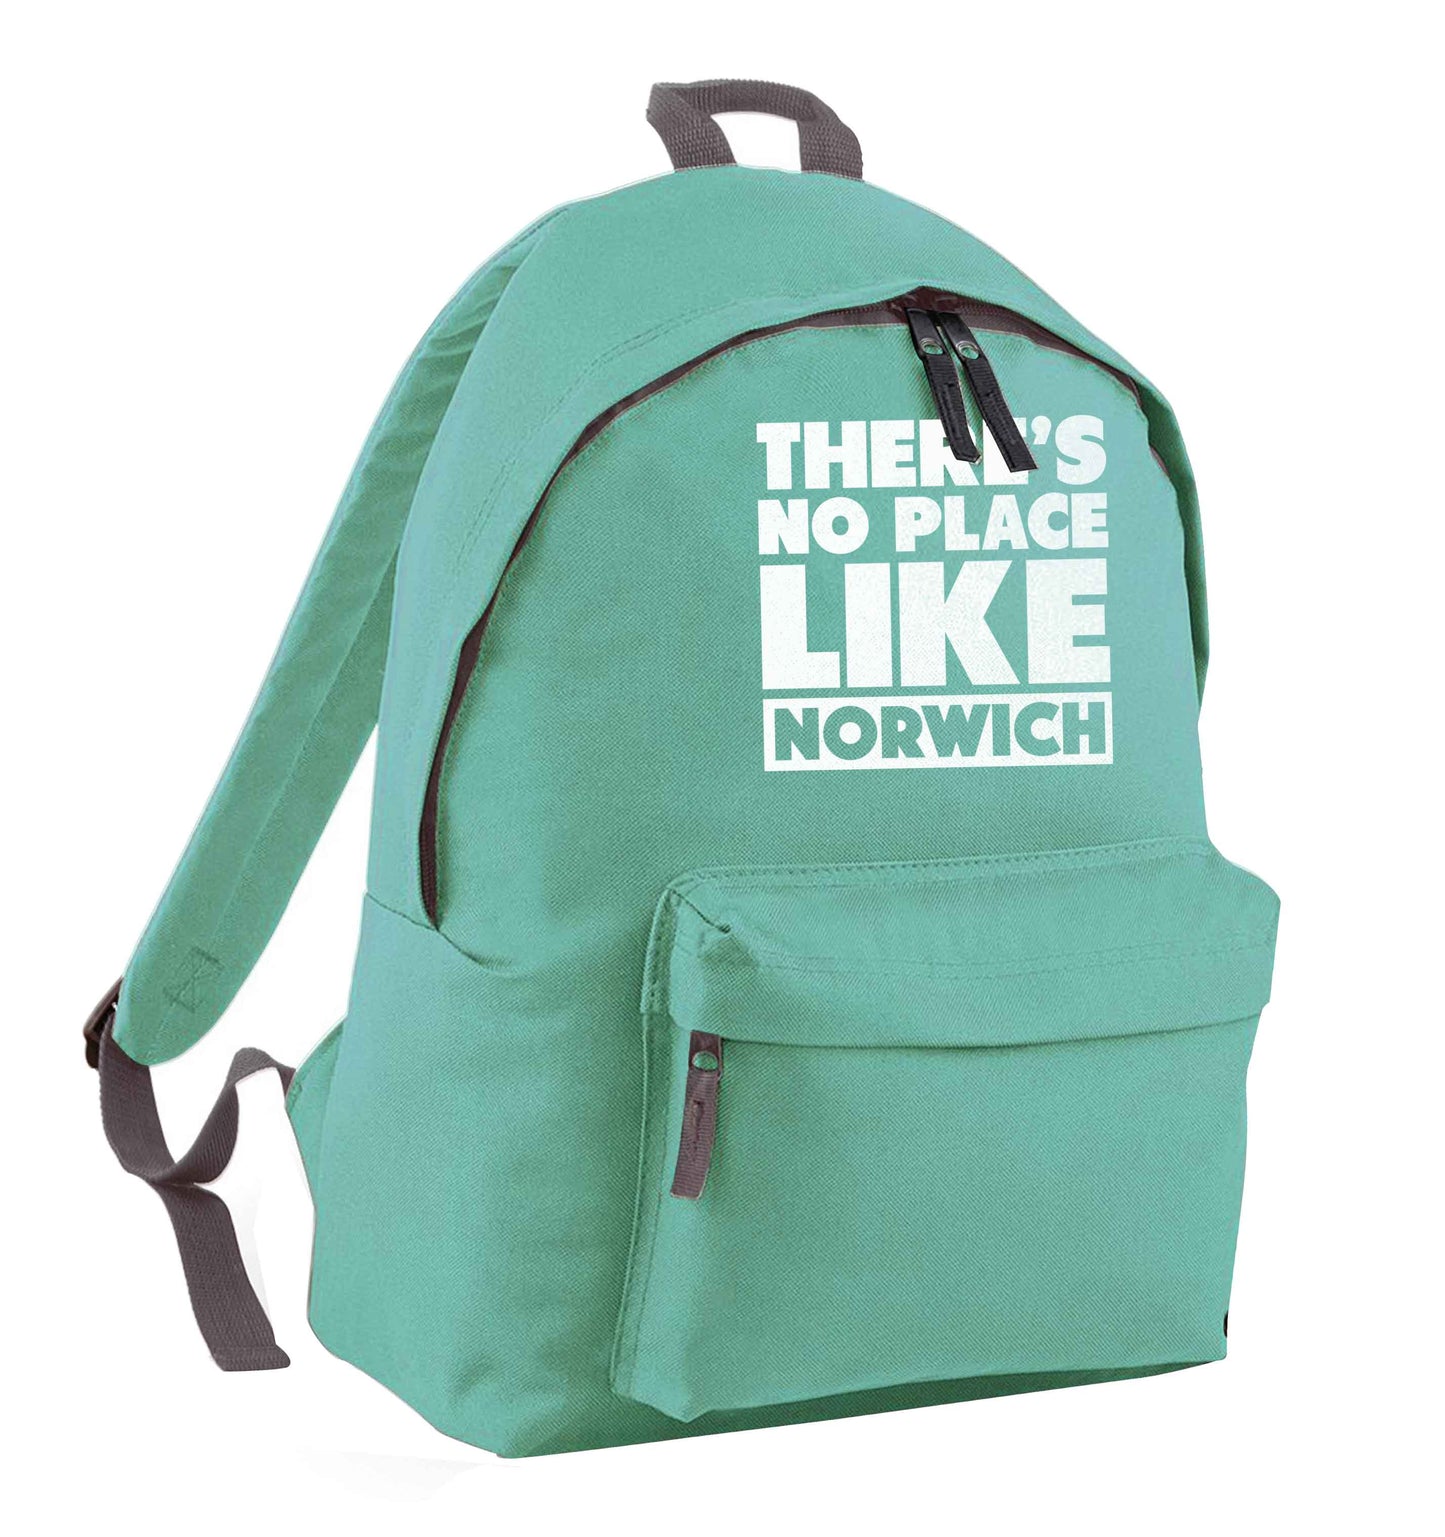 There's no place like Norwich mint adults backpack